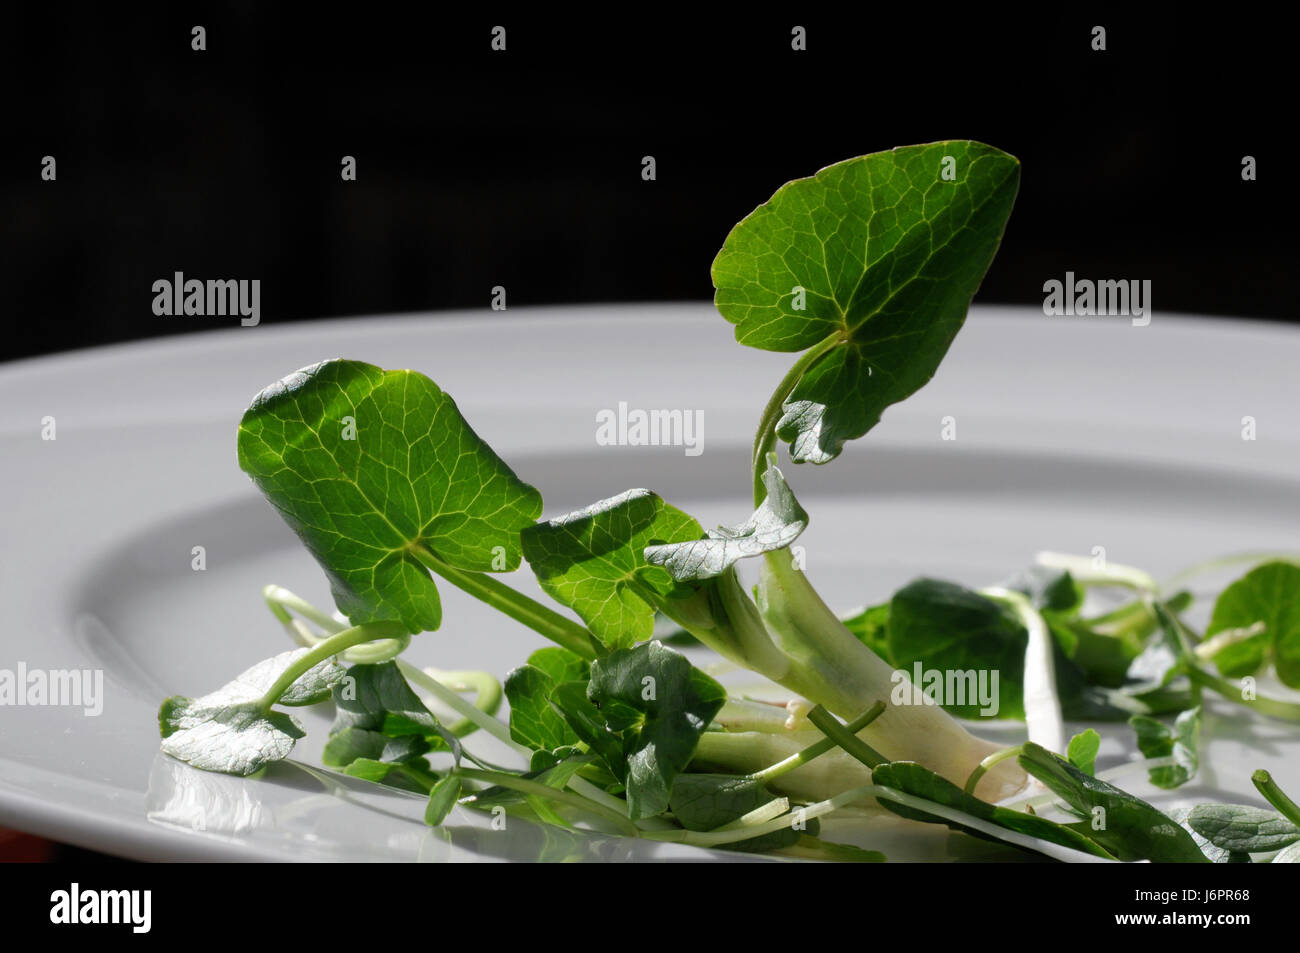 leaf leaf plant green plate photography photo picture image copy deduction Stock Photo